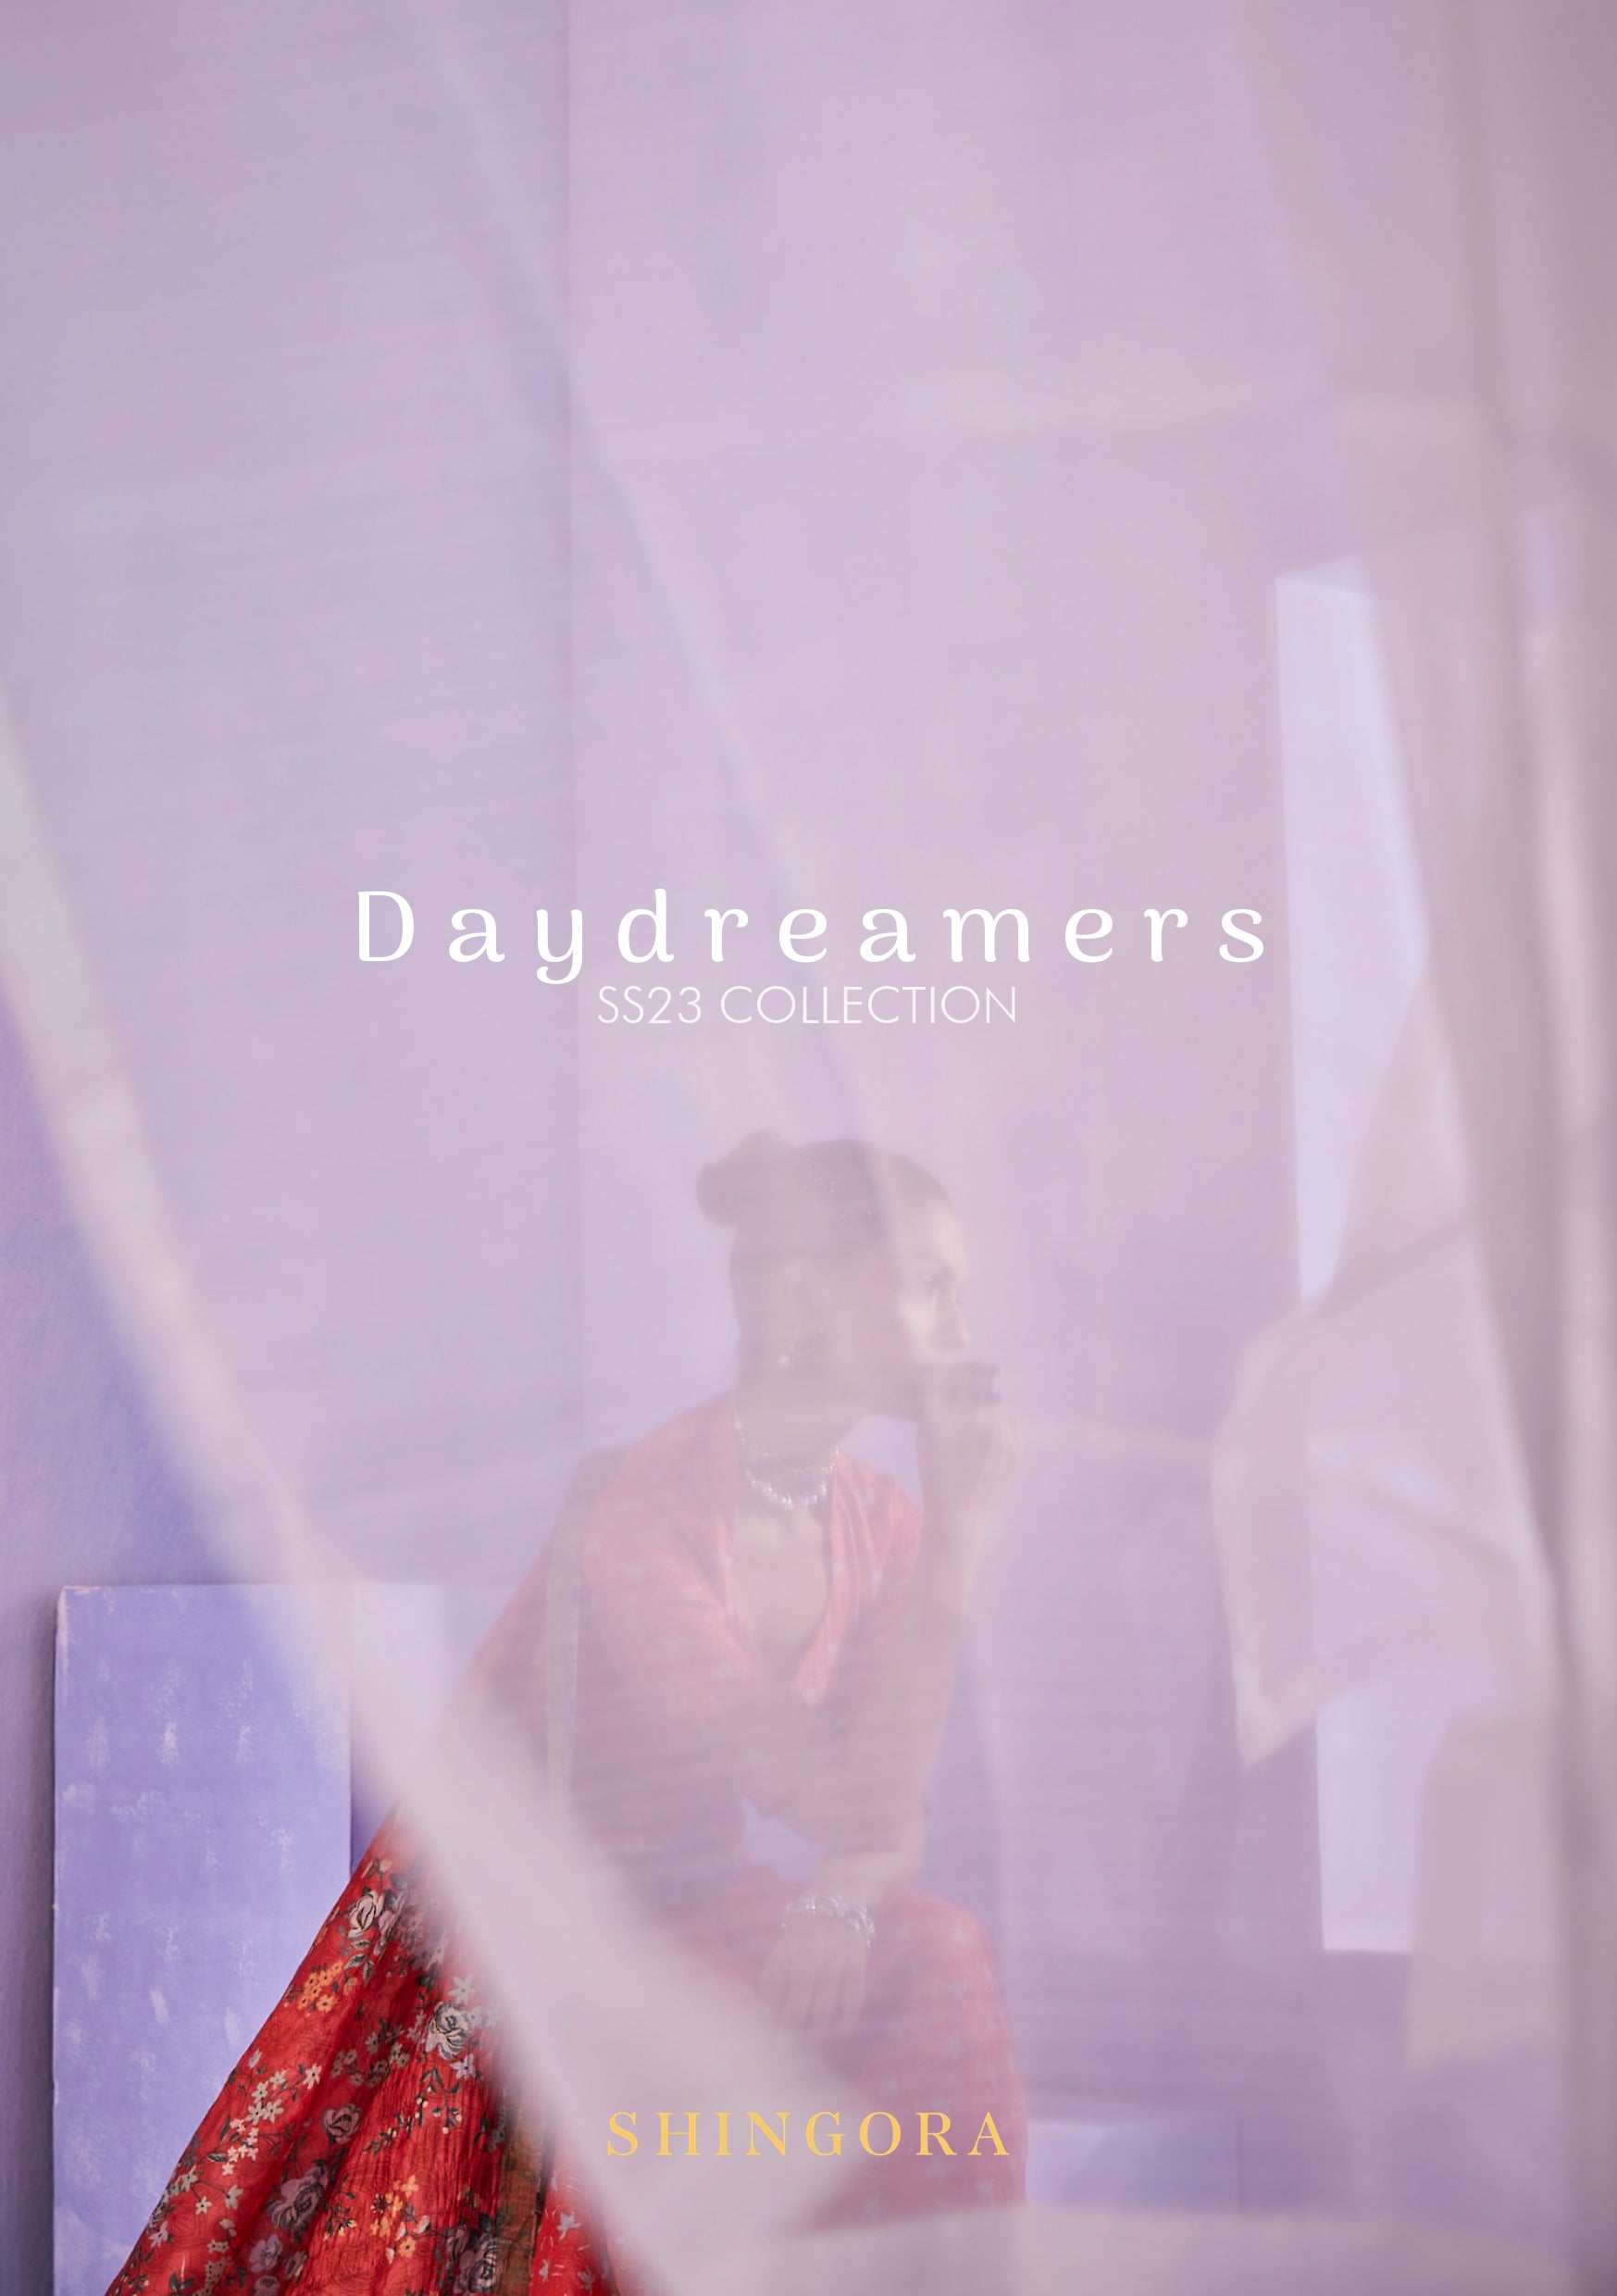 DAYDREAMERS_DOUBLE_PAGES-1.jpg__PID:6c3498e6-5157-4f4f-aacc-d3f1f1c79be3